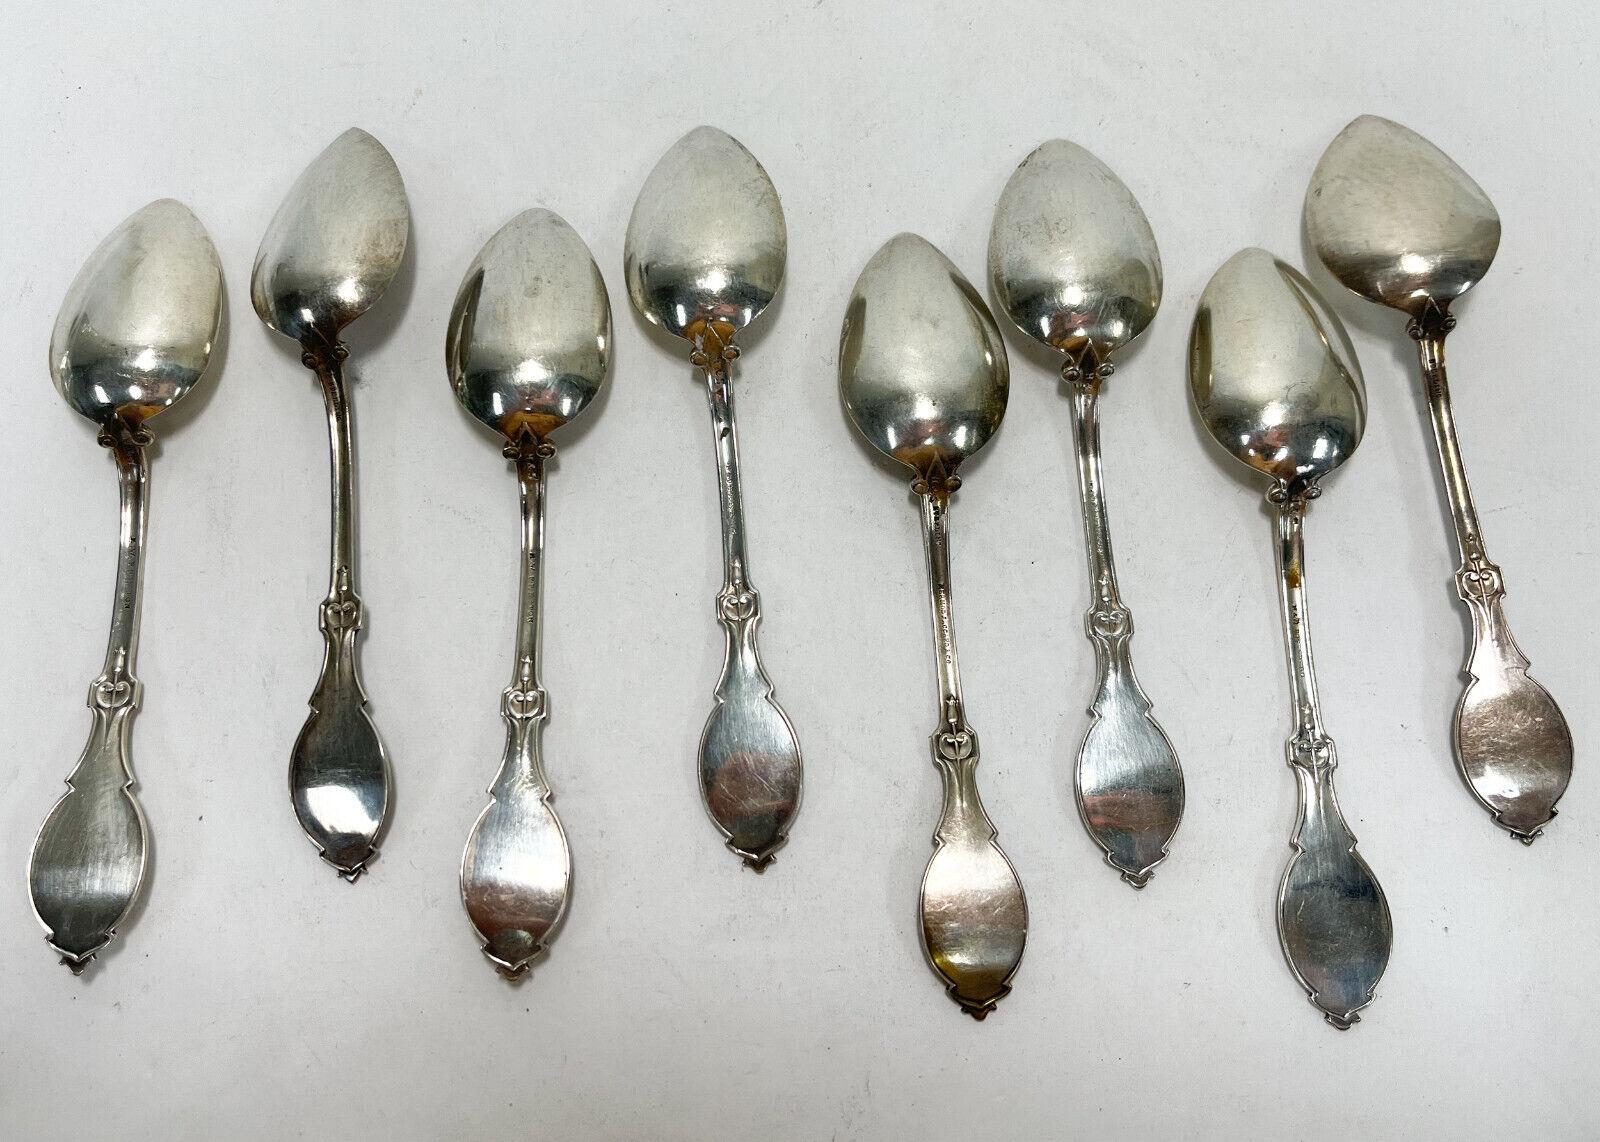 8 Hotchkiss & Schreuder Sterling Silver Medallion Grapefruit Spoons, Late 19th C In Good Condition For Sale In Gardena, CA